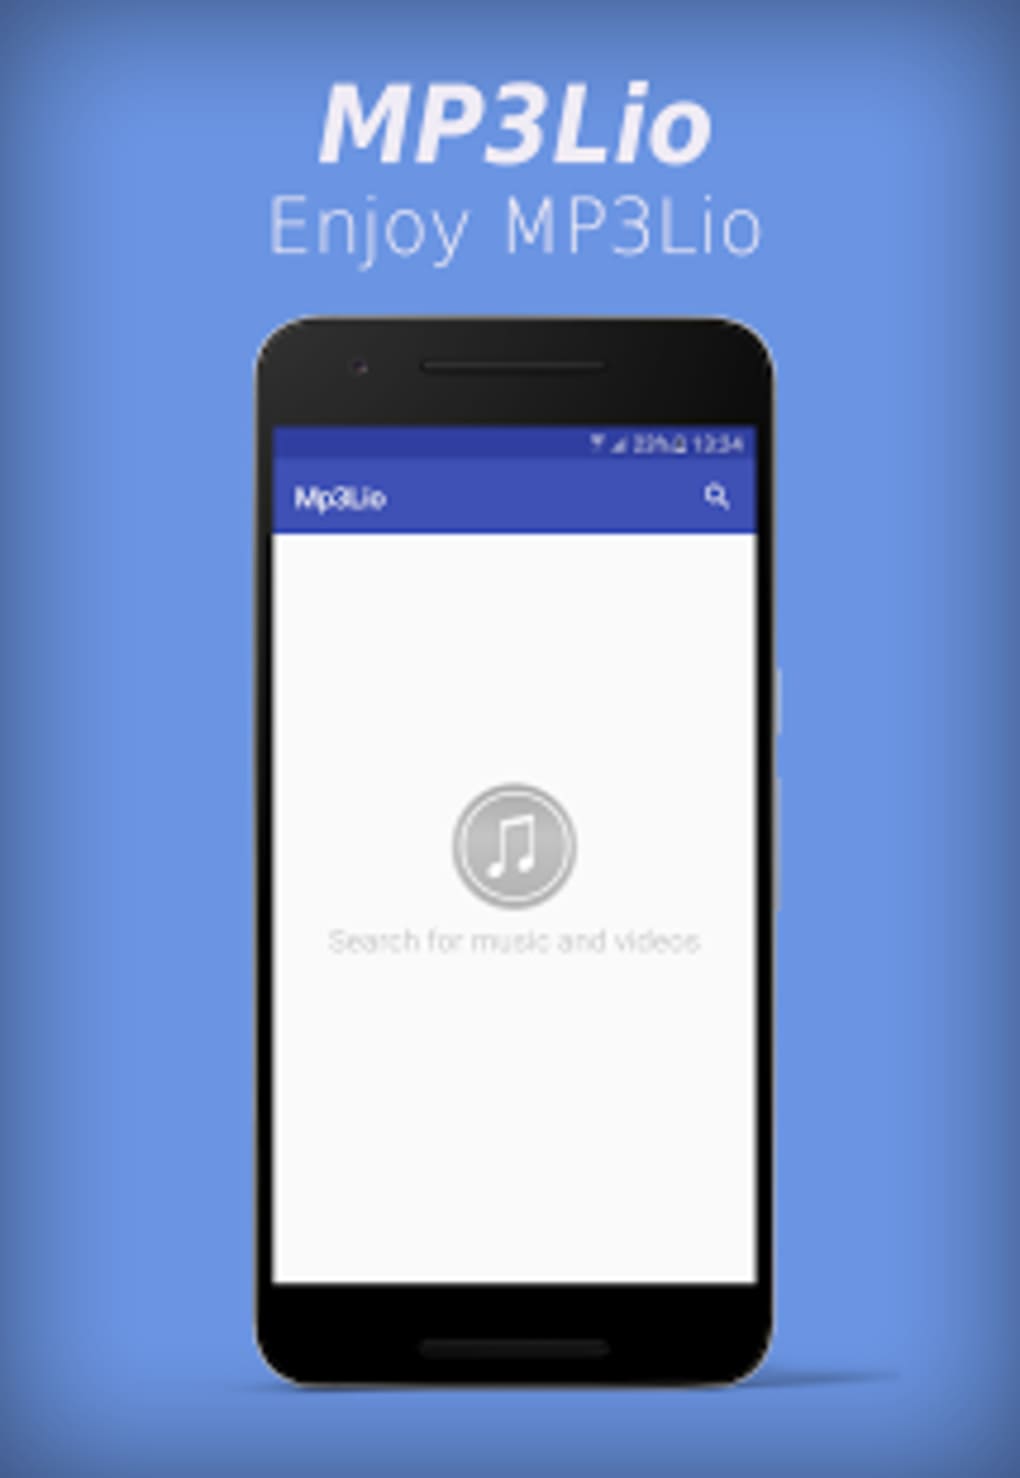 Tamil music download app for android